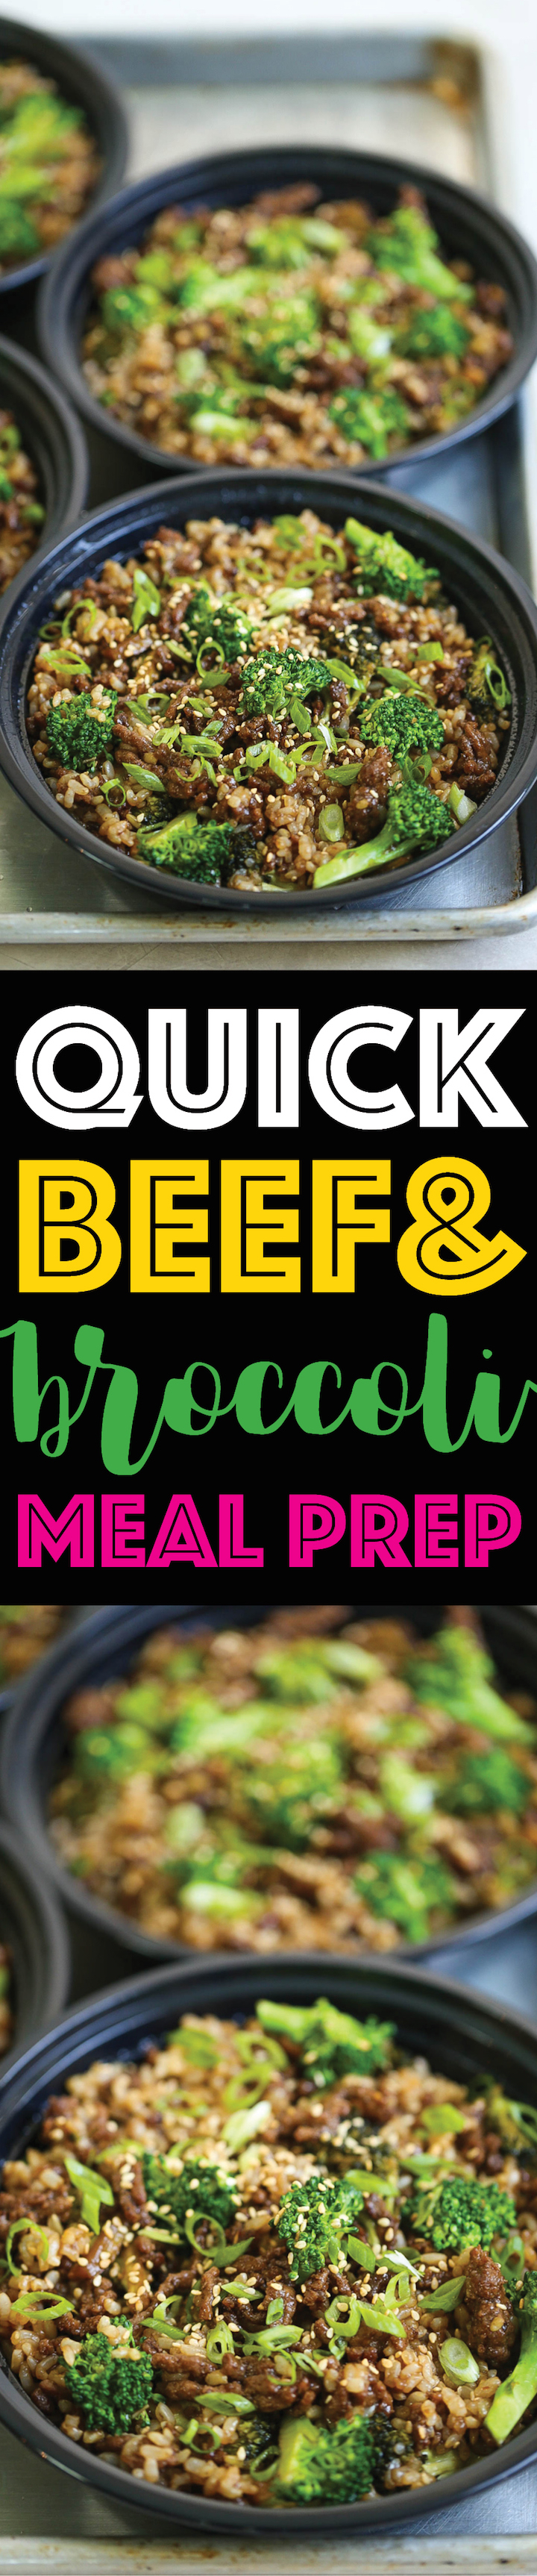 Quick Beef and Broccoli Meal Prep - Everyone's favorite dish made even easier using ground beef! Comes together in 15 min, prepped for the entire week!!!